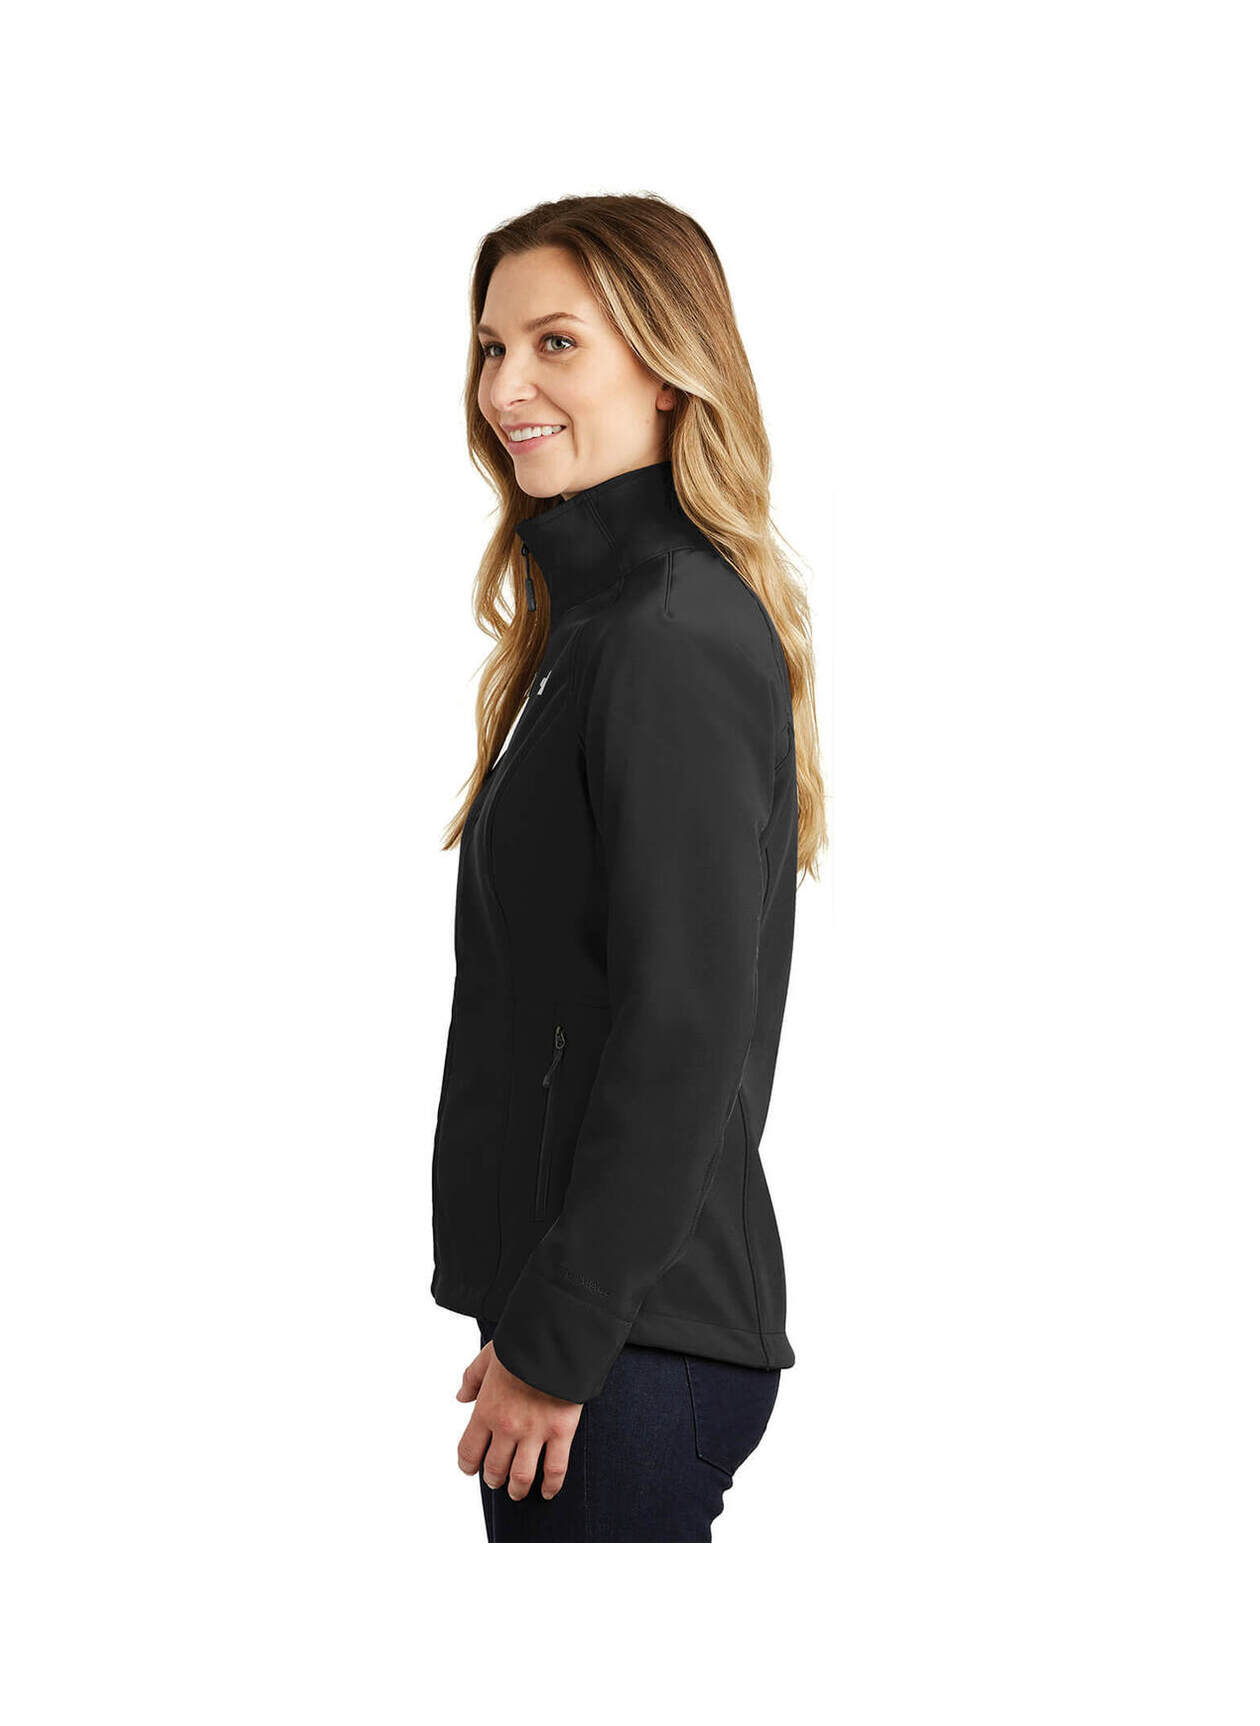 The North Face - Women's Apex Barrier Soft Shell Jacket